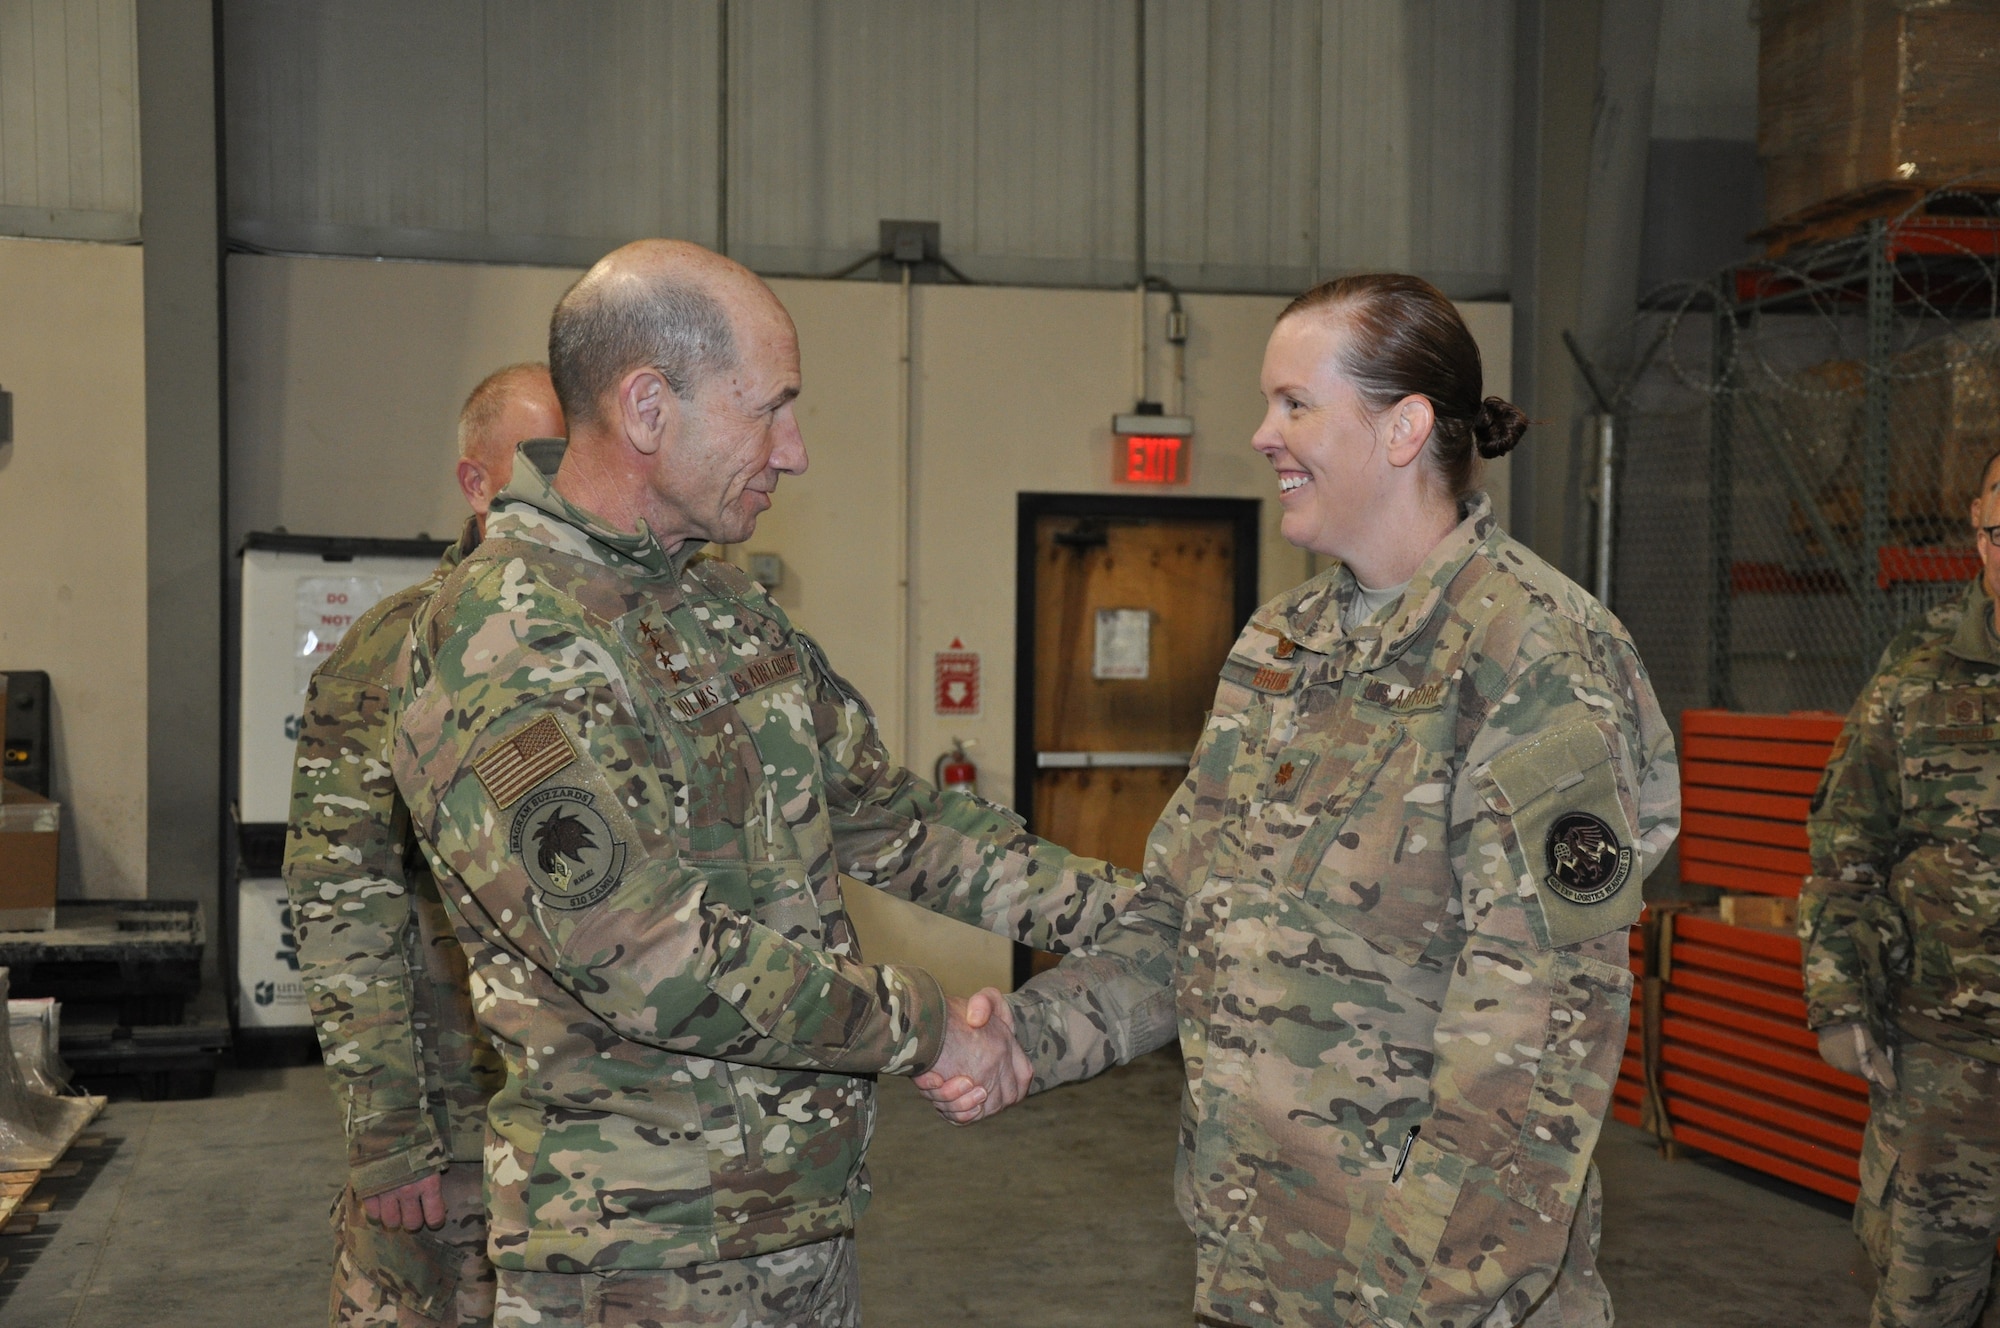 Gen. Mike Holmes, commander of Air Combat Command, coins Maj. Mieke Bruins, commander, 455th Expeditionary Logistics Readiness Squadron, during a visit to Bagram Airfield, Afghanistan, Feb. 13, 2019.